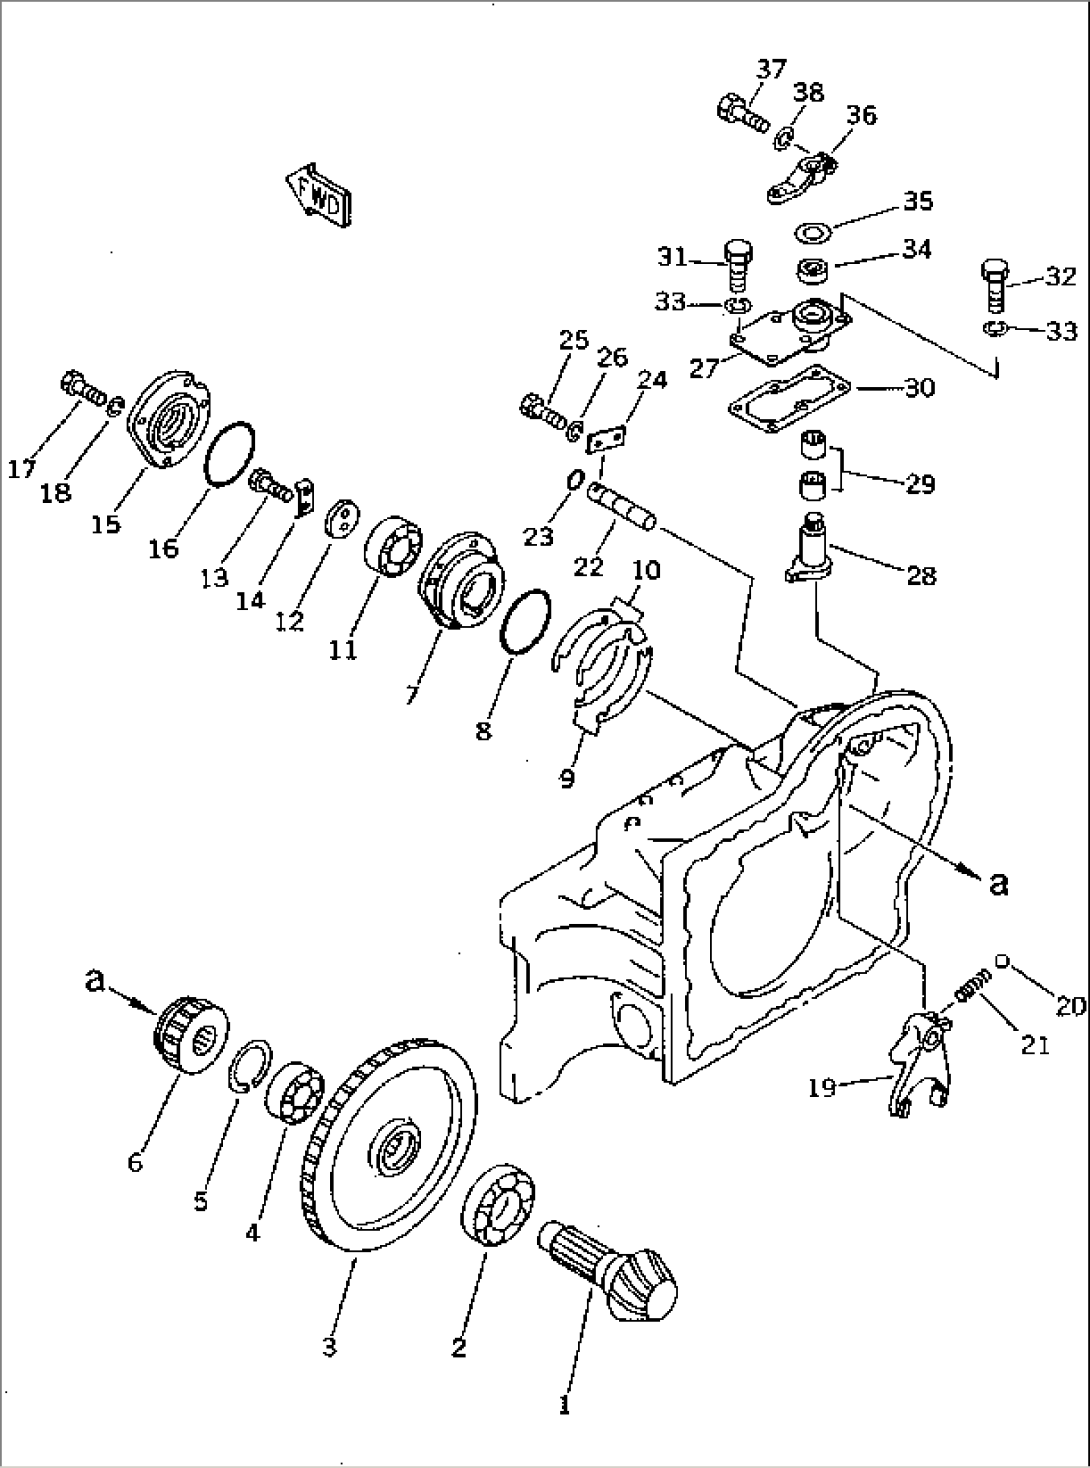 TOWING WINCH (BEVEL PINION AND SHIFT FORK)